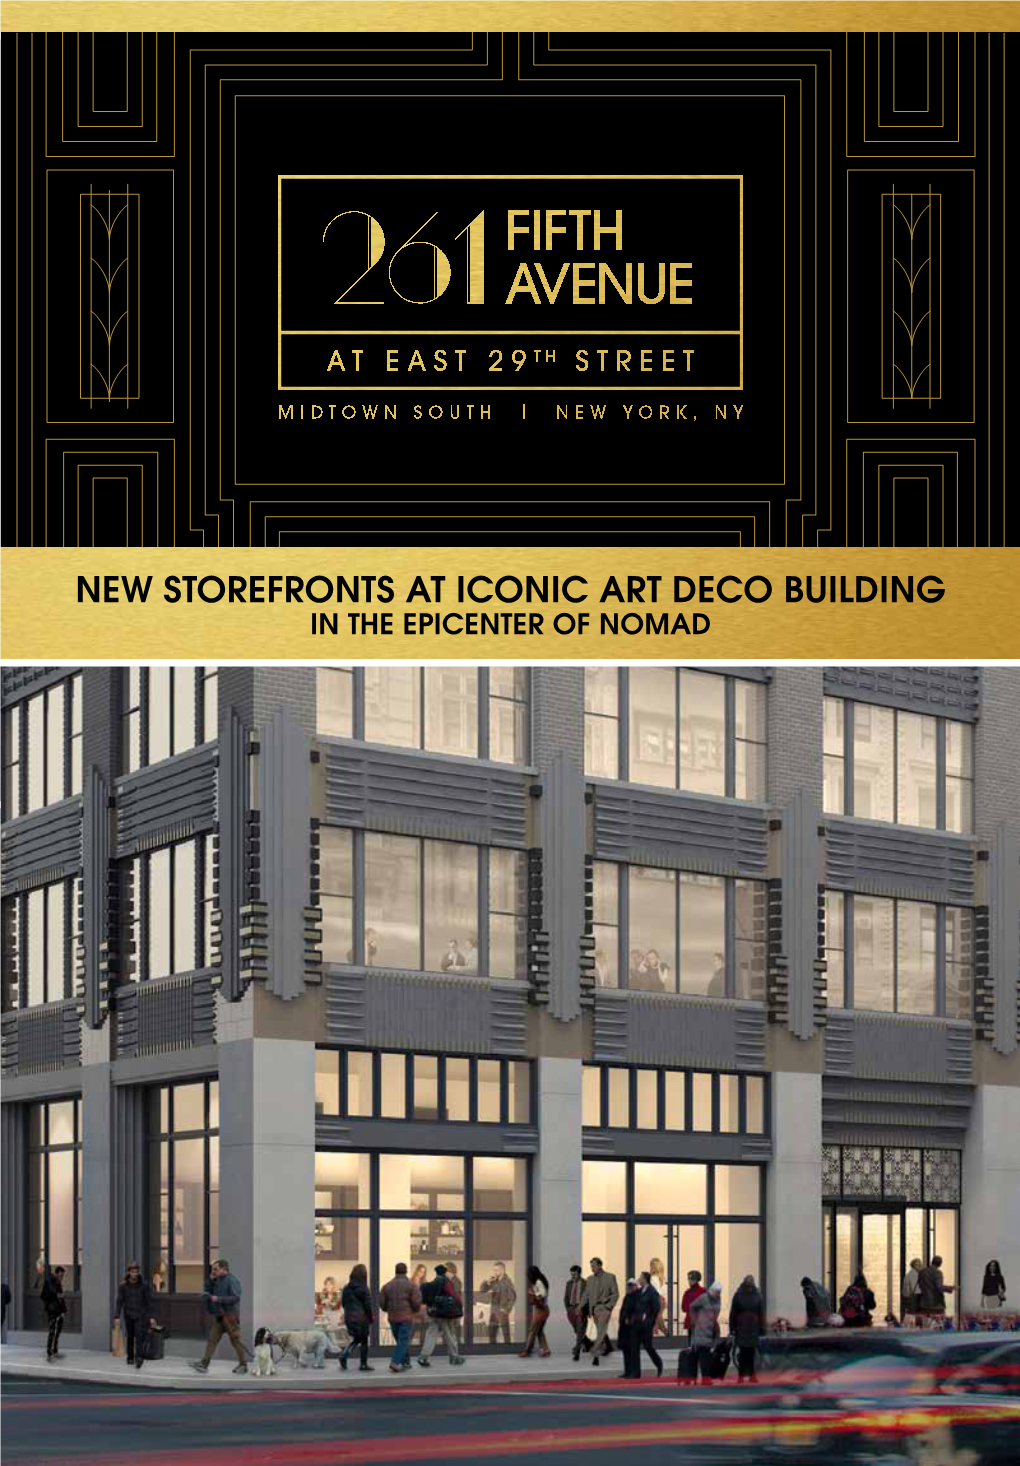 NEW STOREFRONTS at ICONIC ART DECO BUILDING in the EPICENTER of NOMAD the Transformation of 261 Fifth Avenue Heralds a New Era for the Iconic Art Deco Building